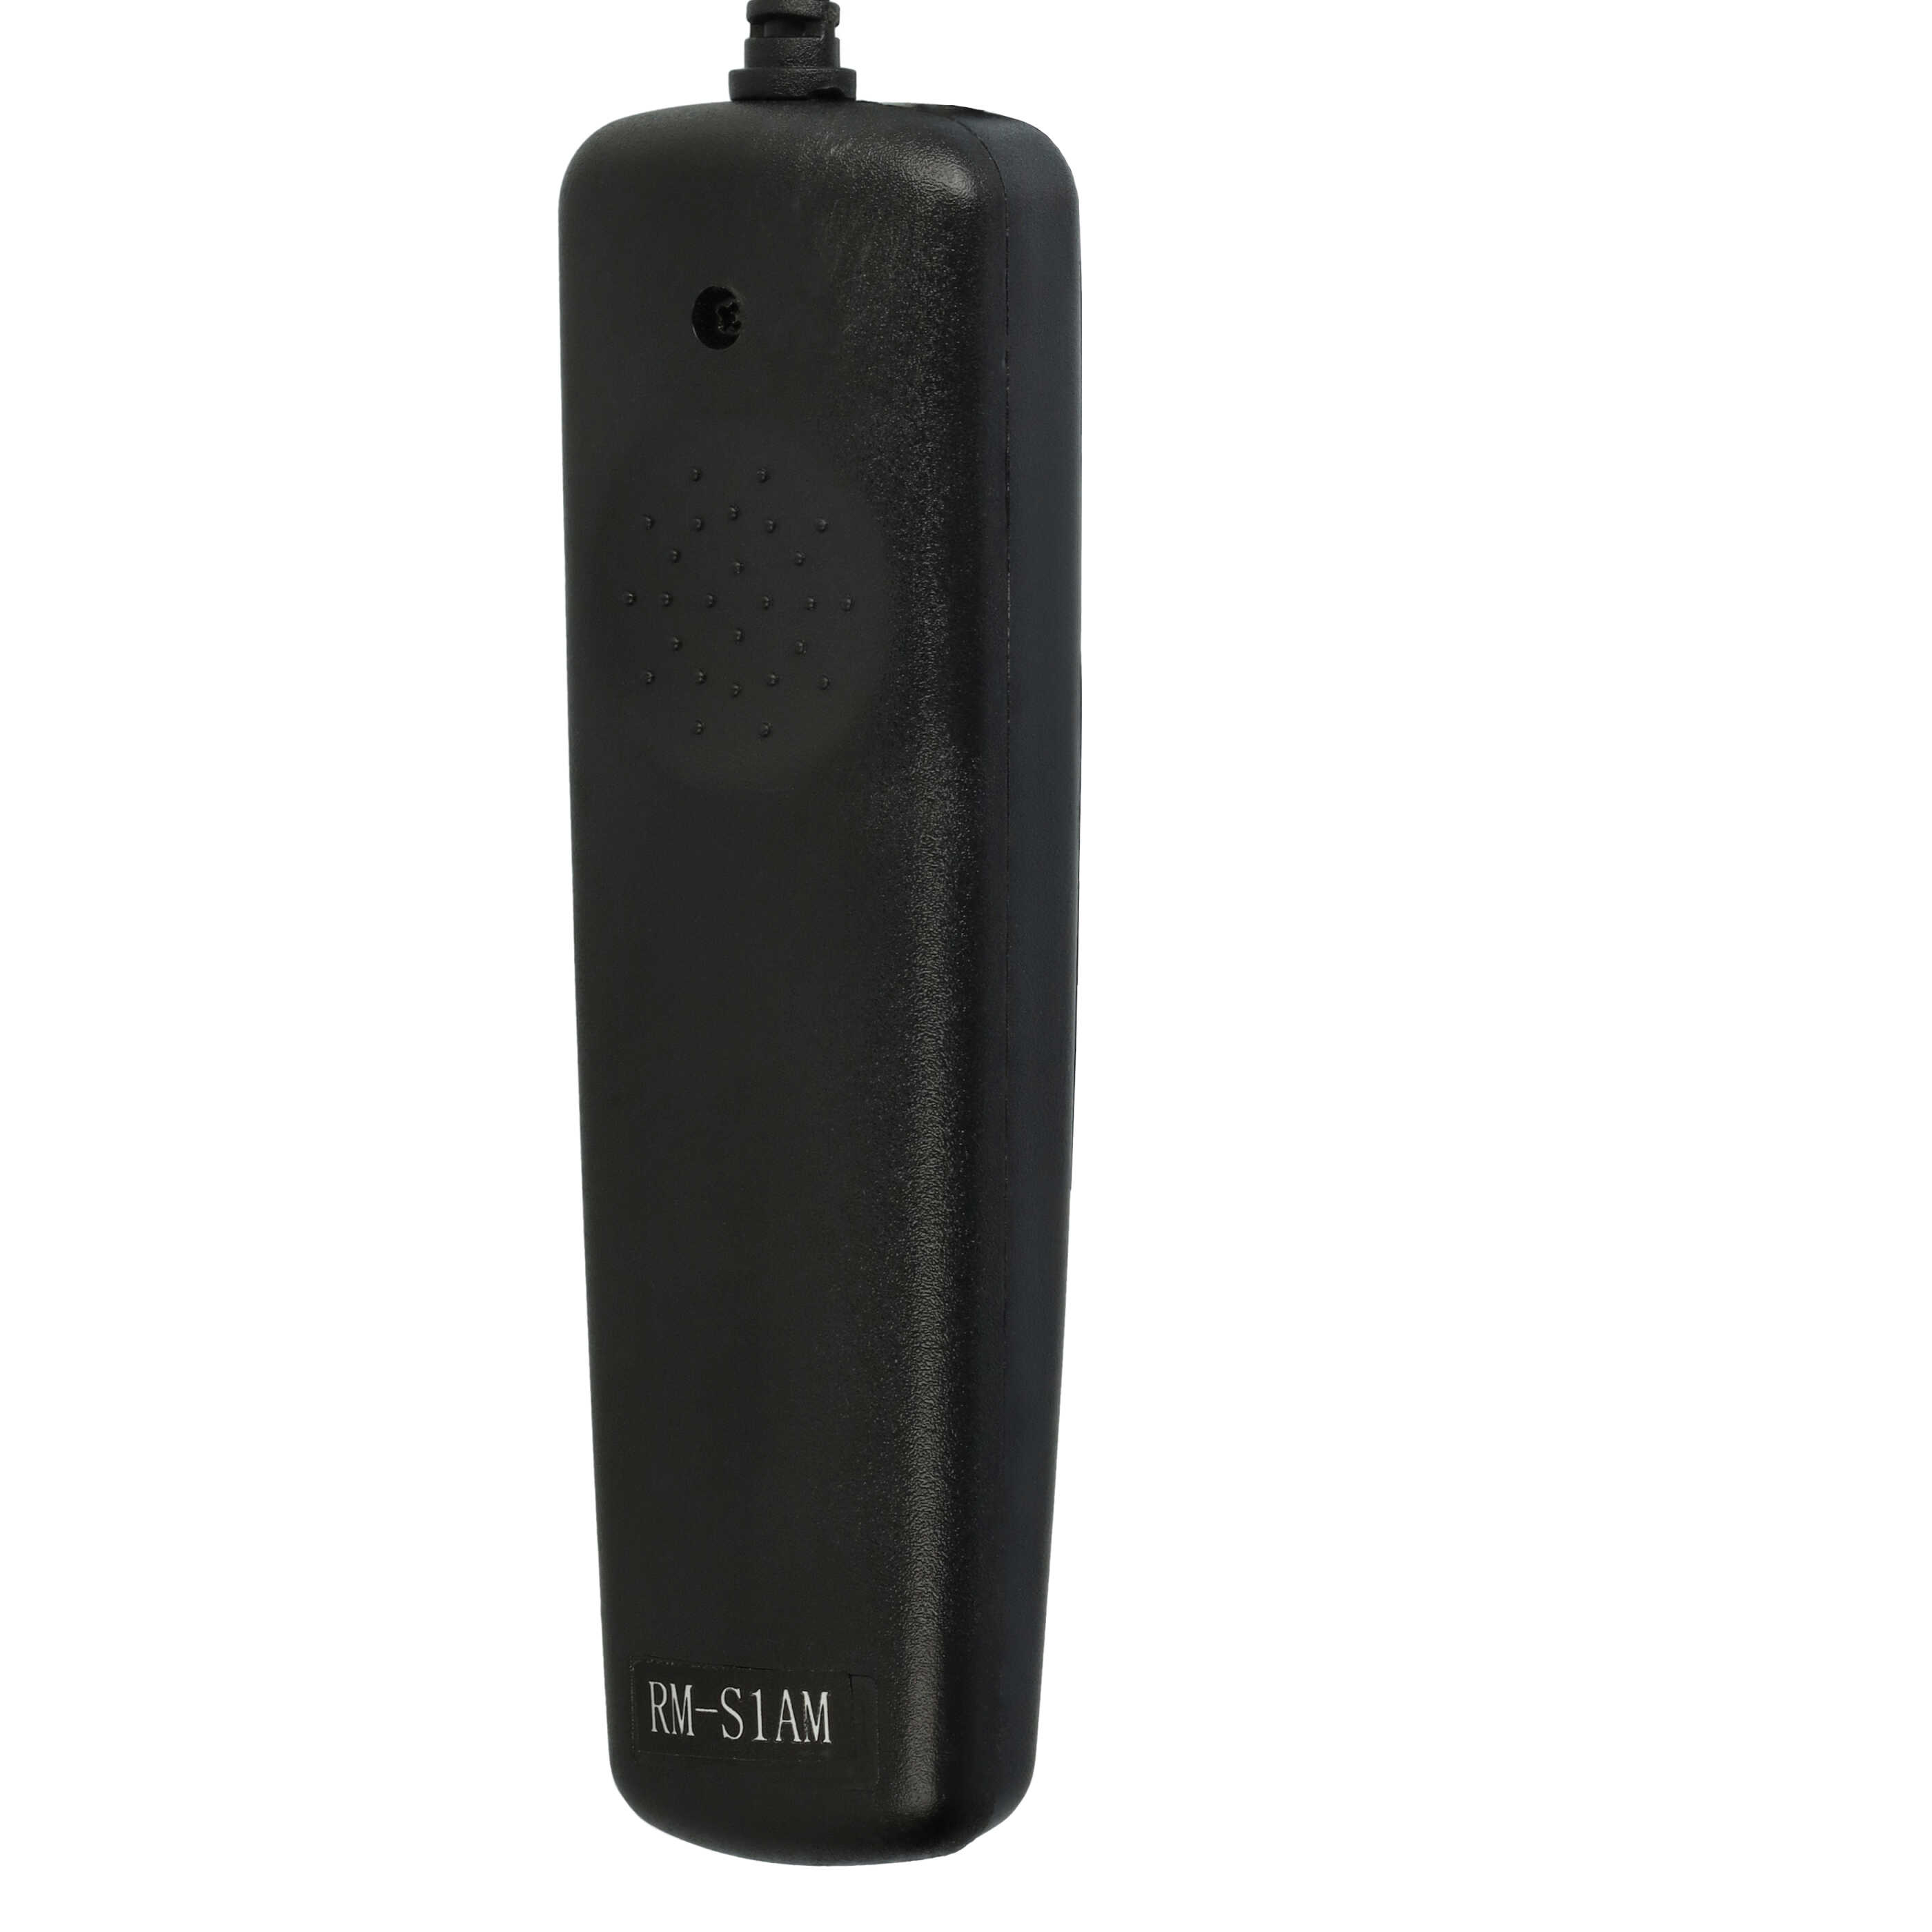 Remote Trigger as Exchange for Konica Minolta RC-1000L for Camera etc. 2-Step Shutter, 1 m Lead